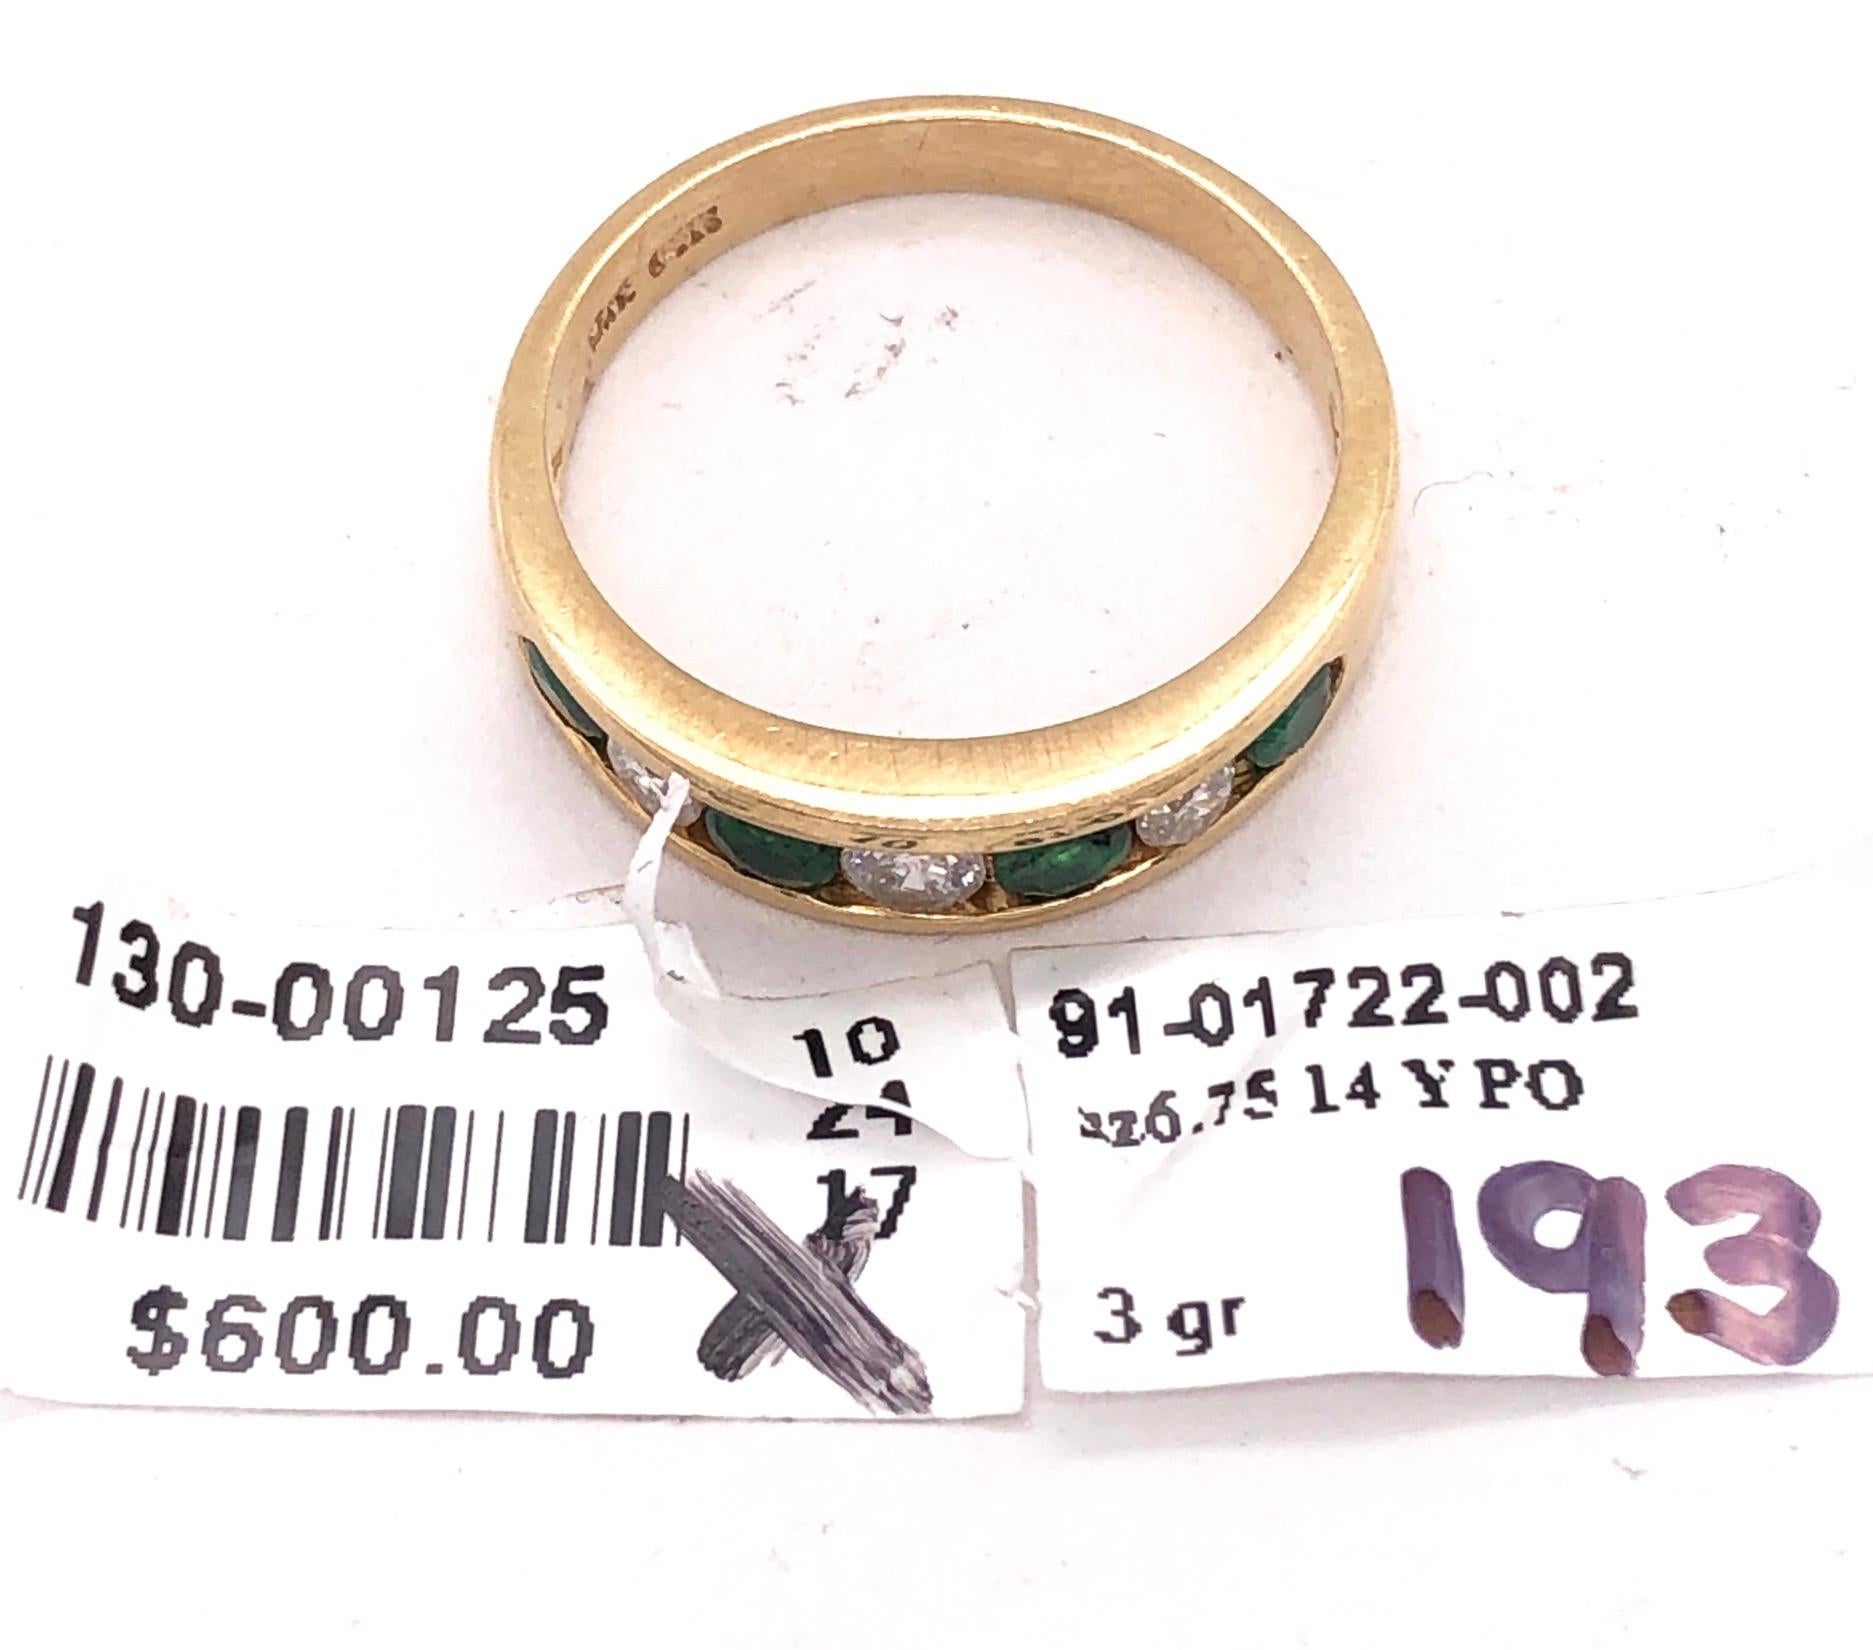 14 Karat Gold Ring or Wedding Band Seven-Stones Emerald and Diamond .36TDW For Sale 4